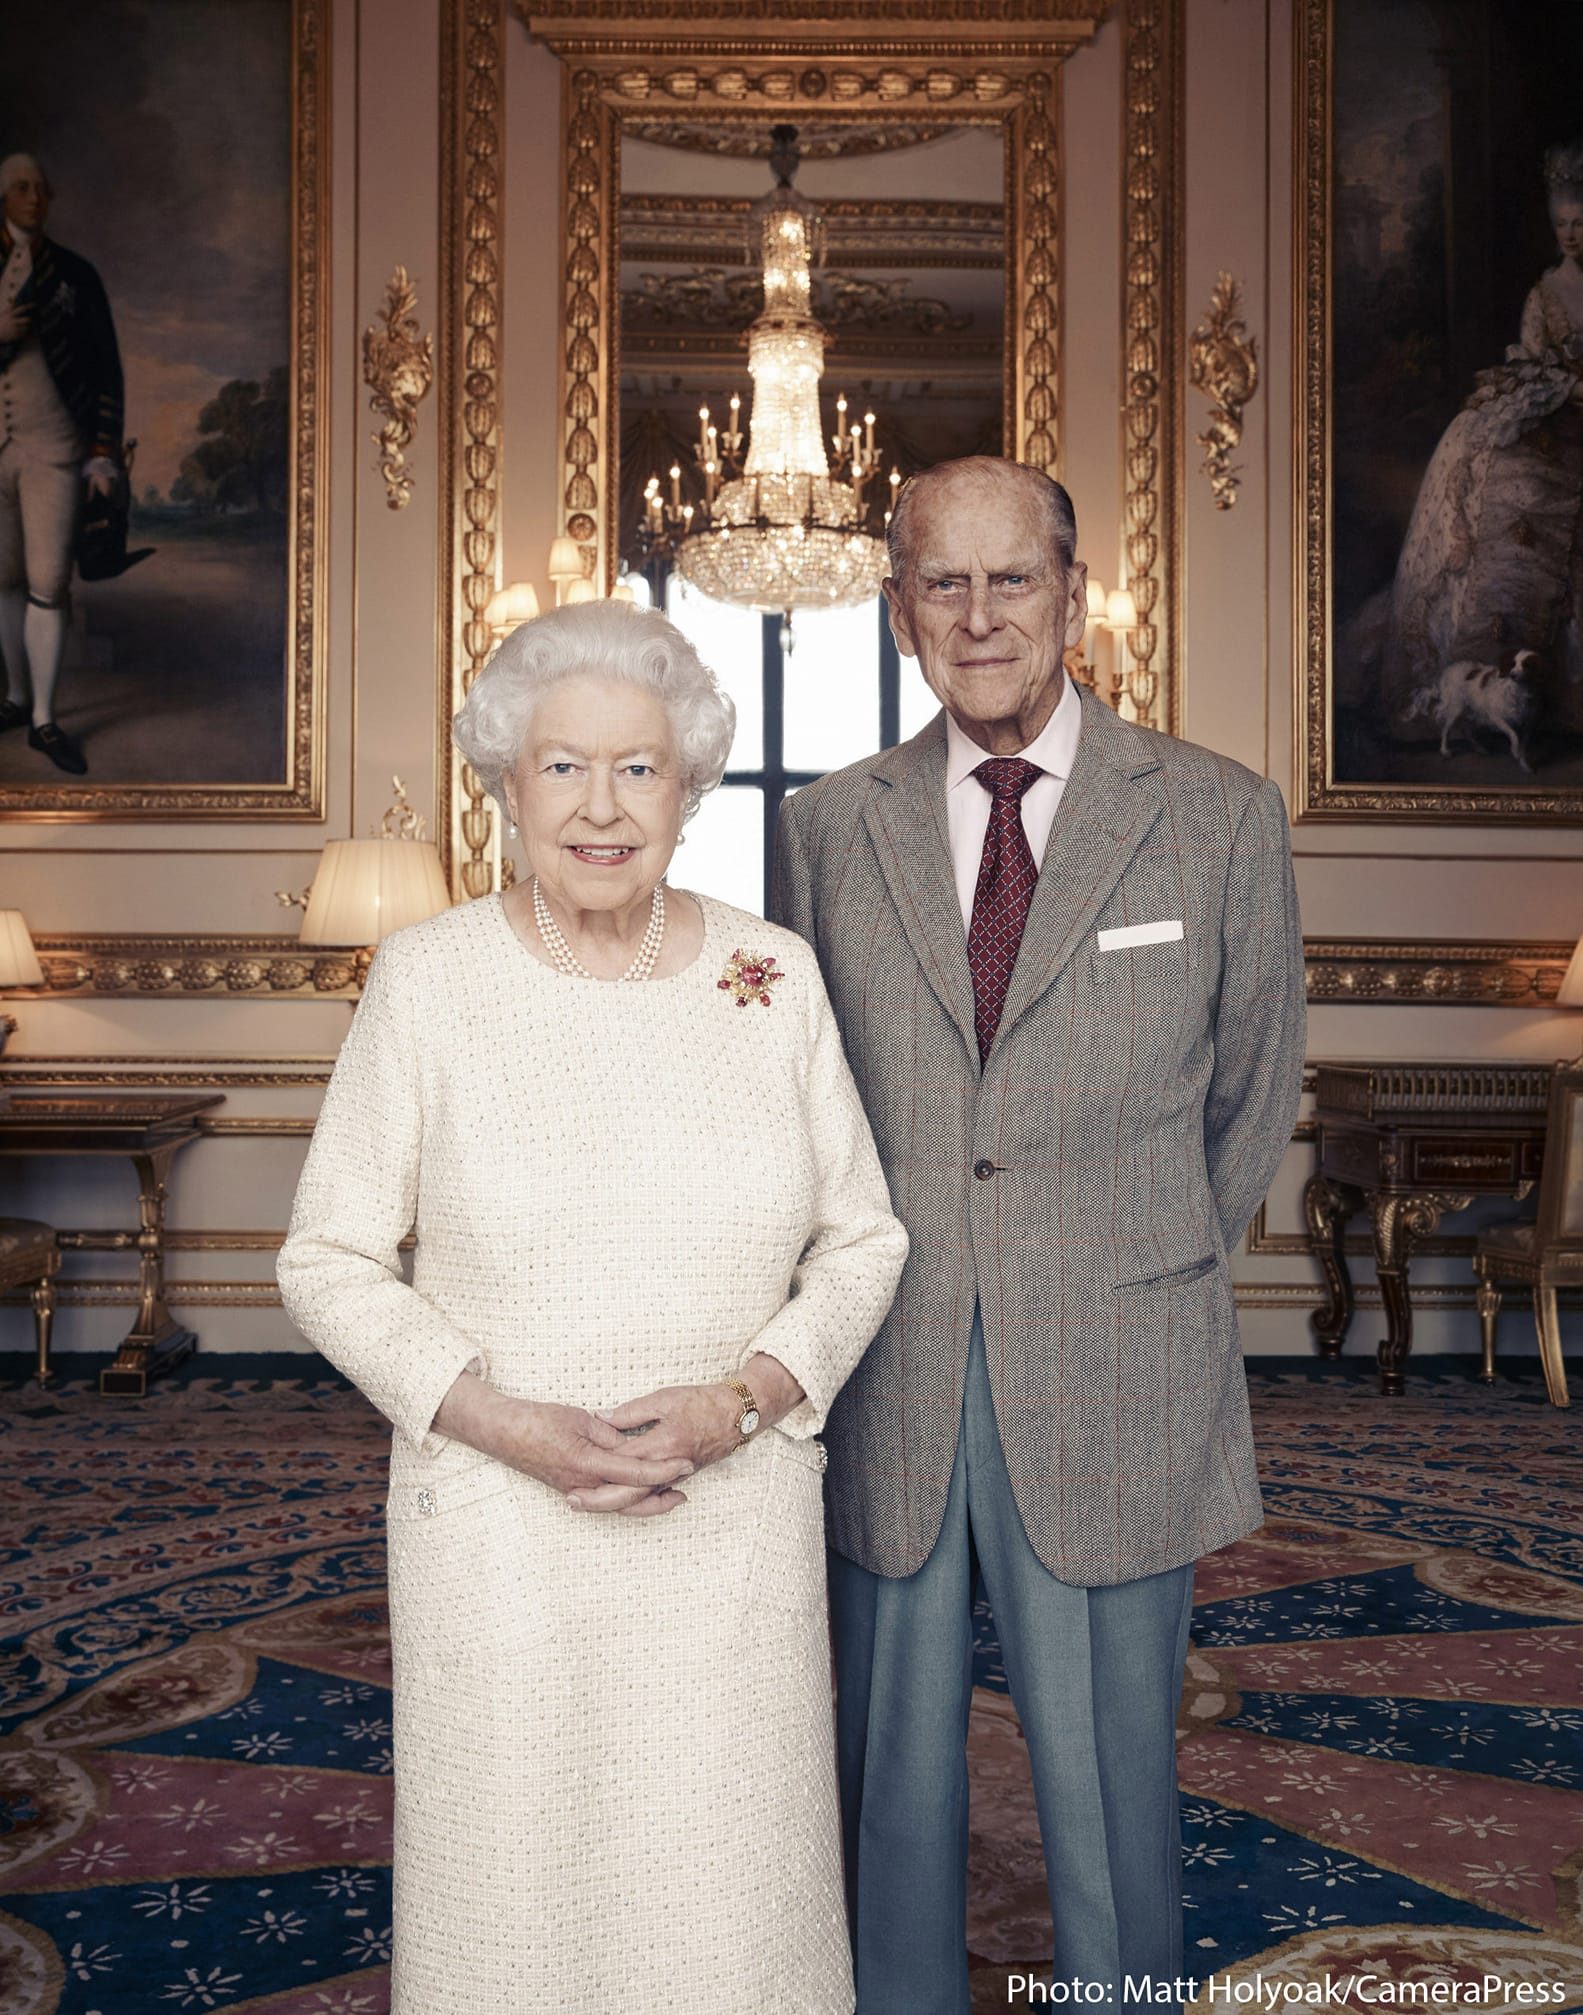 ROYAL COUPLE. In this photograph released by Buckingham Palace on November 18, 2017 and taken by Camera Press photographer Matt Holyoak in November 2017, Britain's Queen Elizabeth II and her husband, Britain's Prince Philip, Duke of Edinburgh pose between Thomas Gainsborough's 1781 portraits of George III and Queen Charlotte in the White Drawing Room at Windsor Castle, to mark their Platinum Wedding Anniversary (70 years). Matt Holyoak / CameraPress / Buckingham Palace 